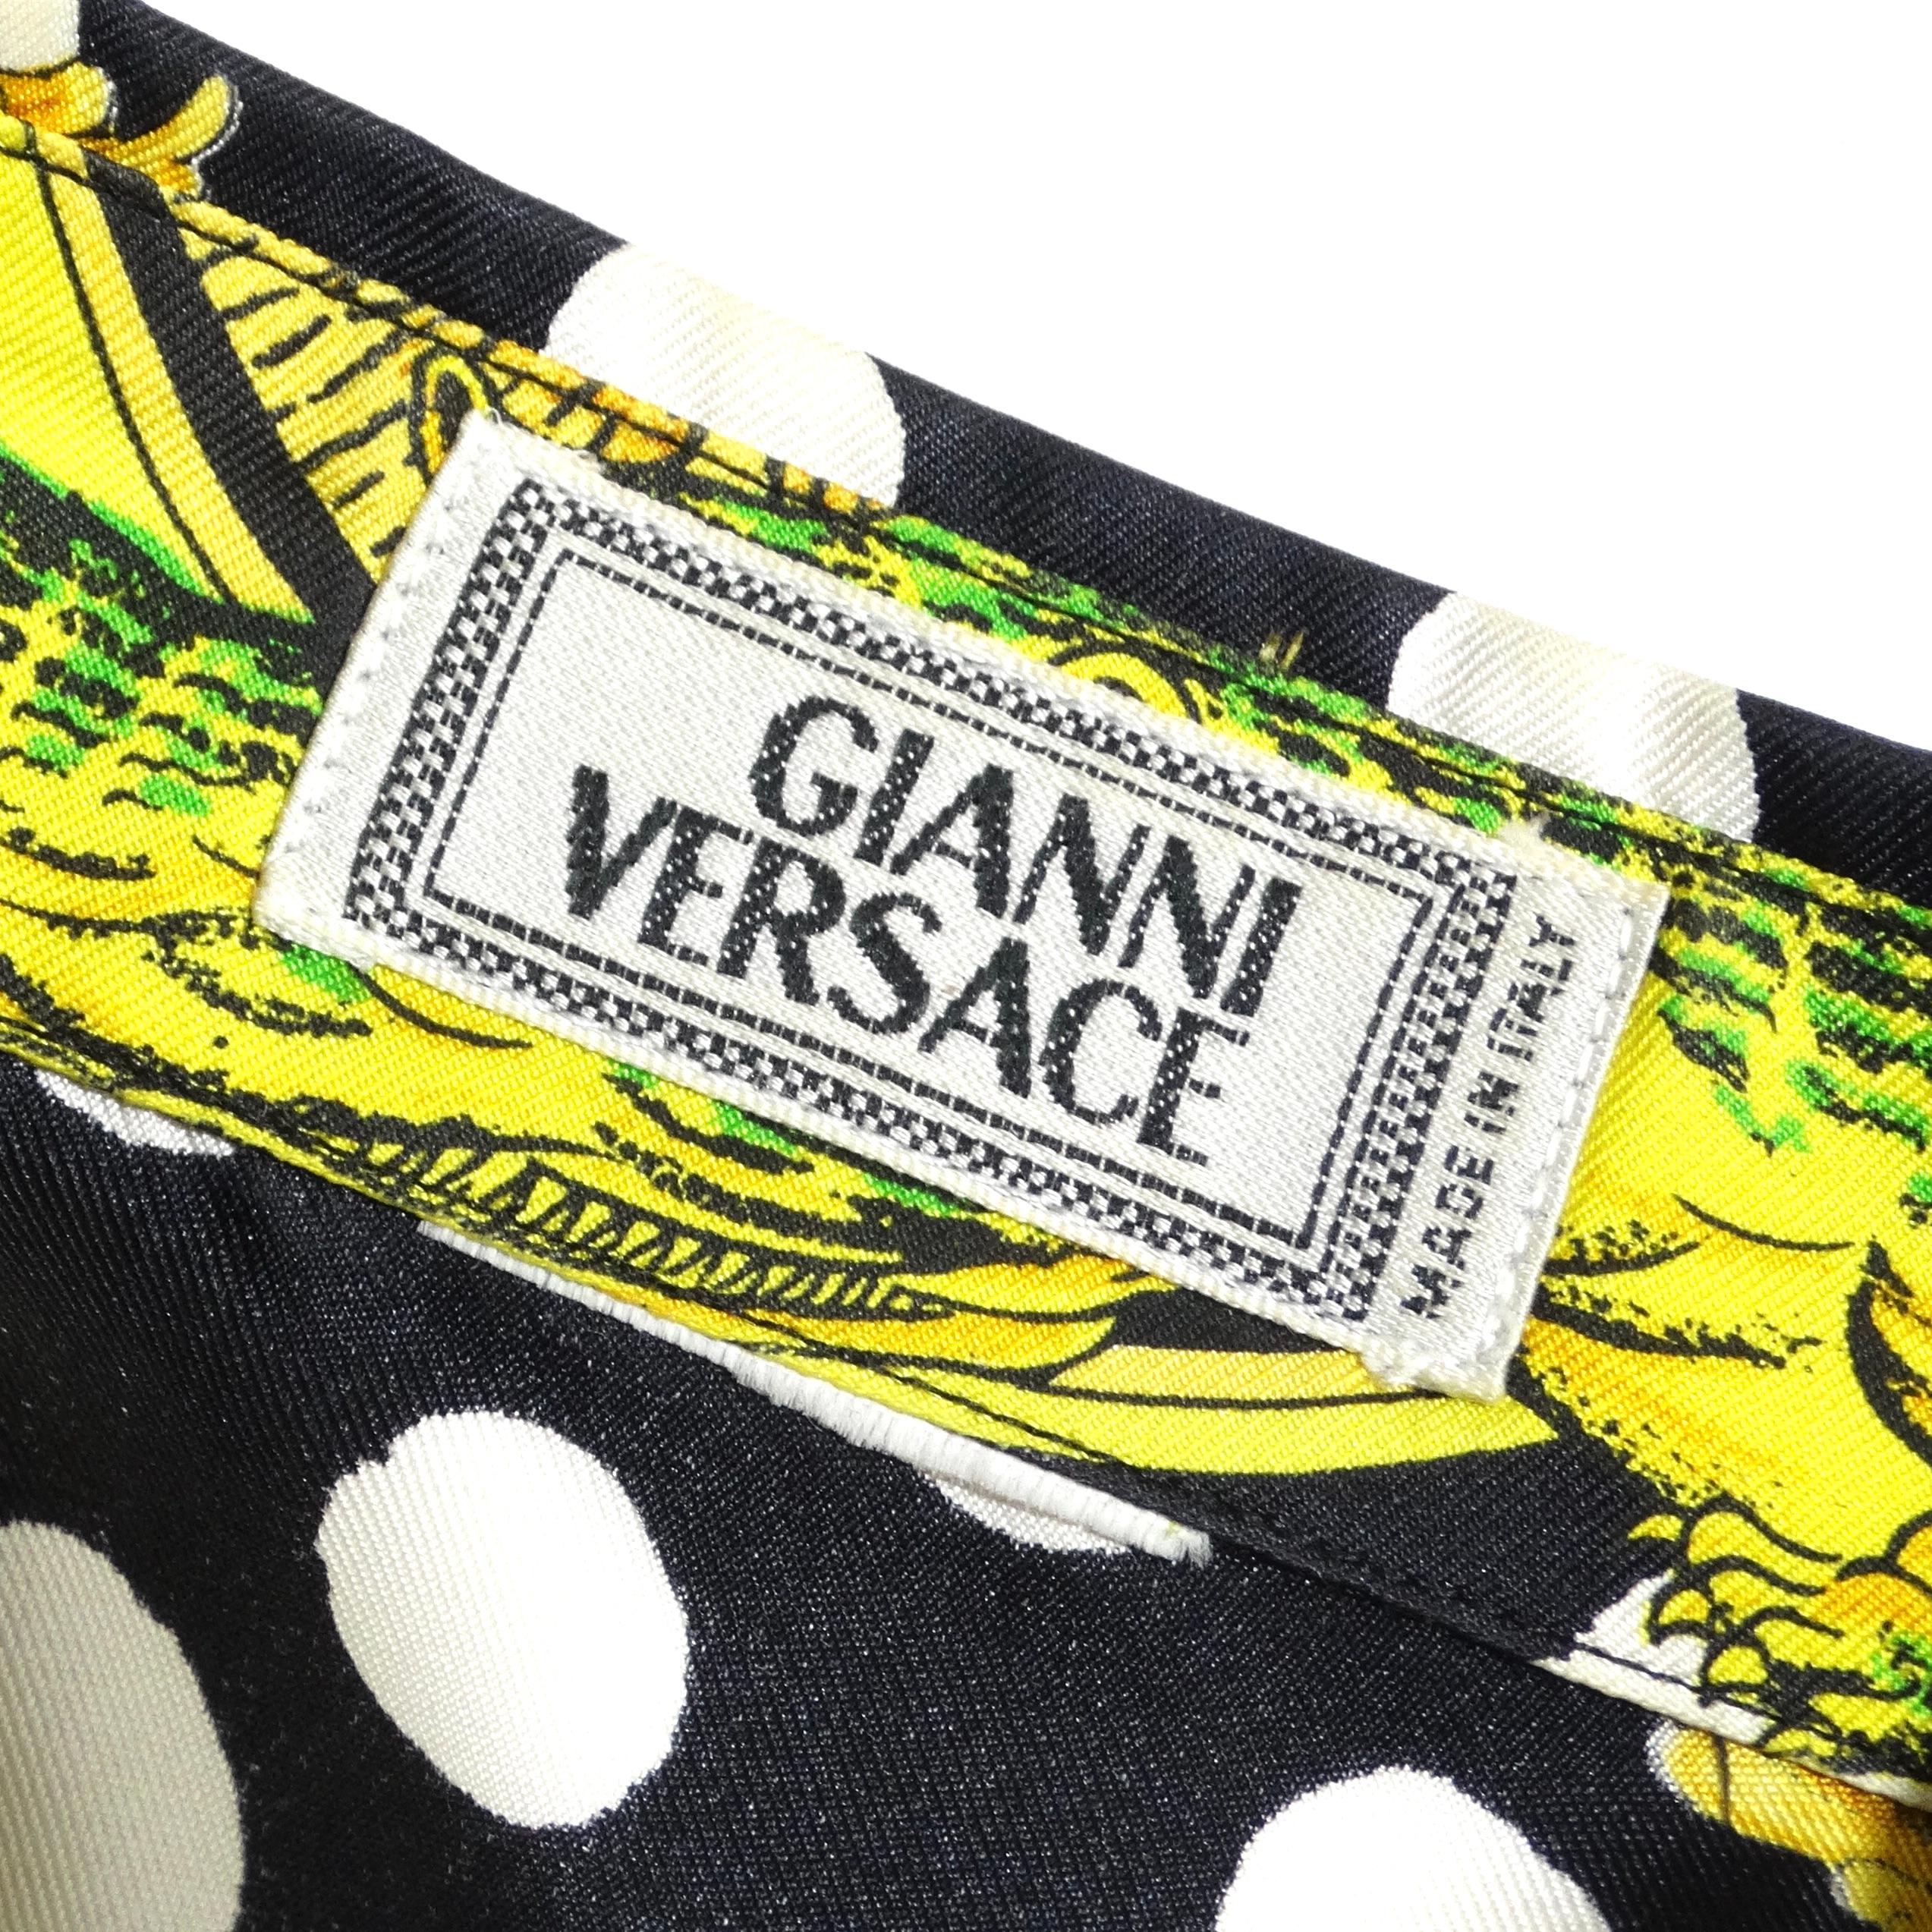 Gianni Versace 1990s Miami Collection Silk Printed Shirt For Sale 7